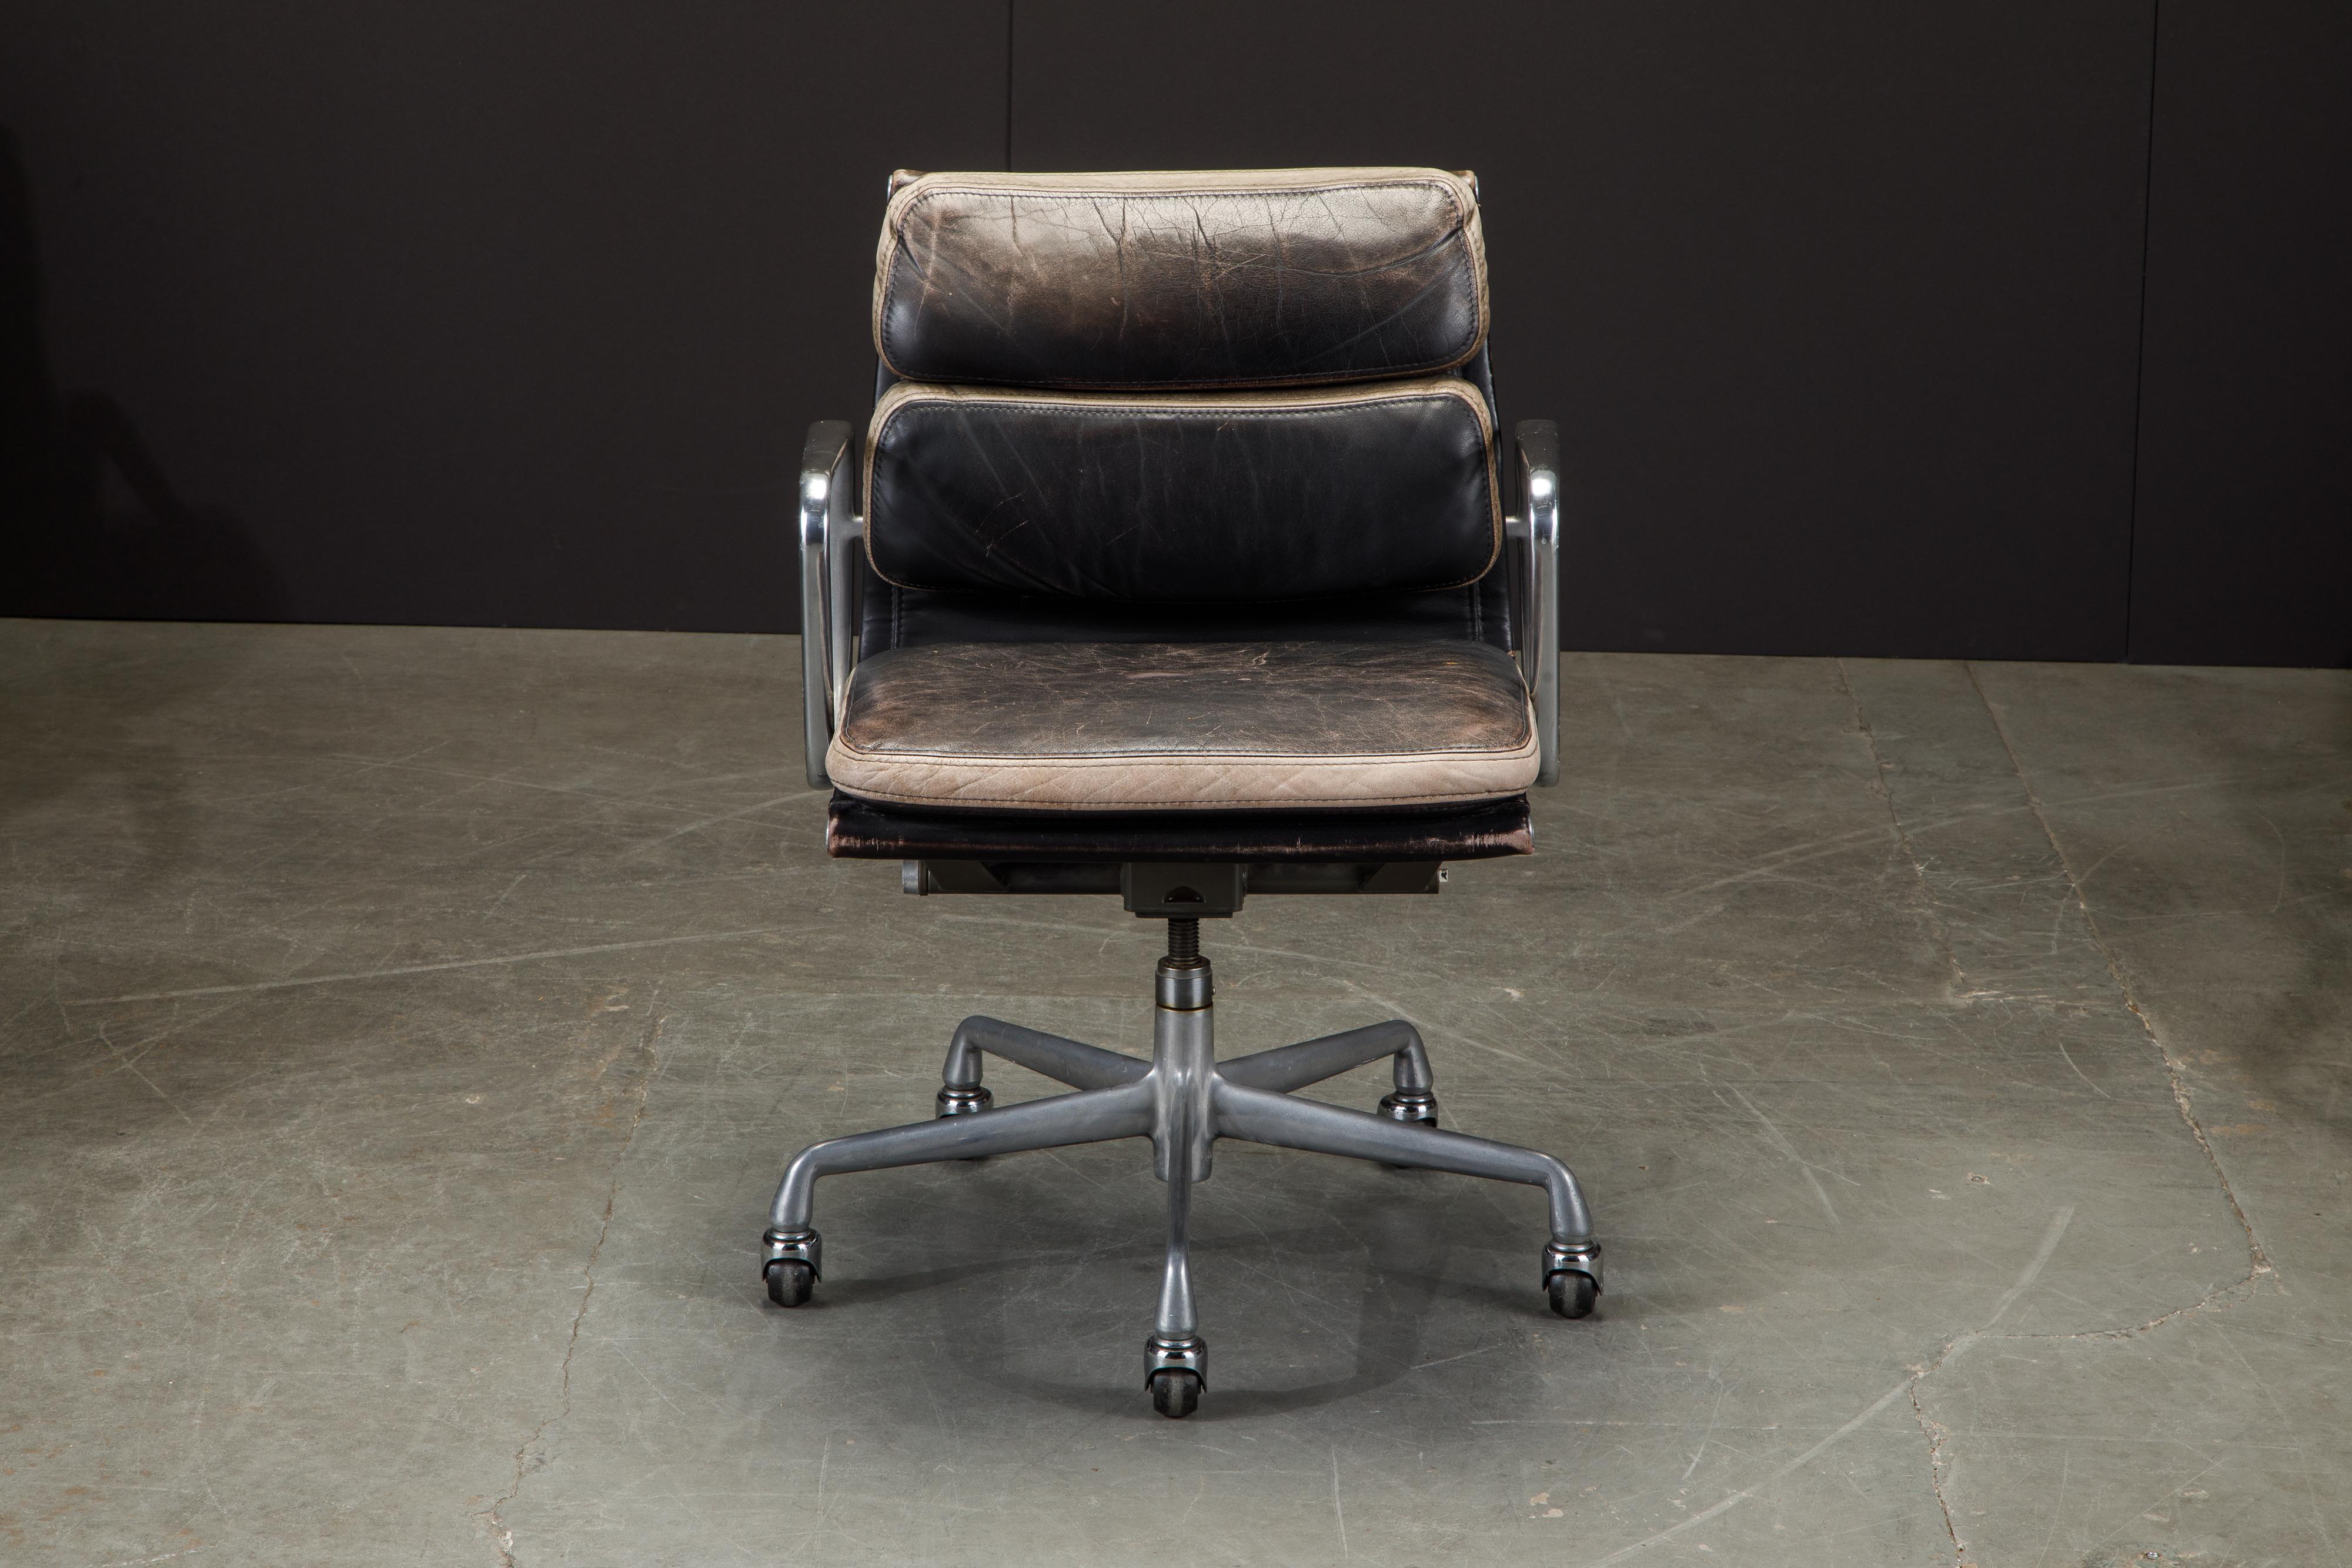 Late 20th Century Patinated Soft Pad Desk Chairs by Charles Eames for Herman Miller, 1987, Signed